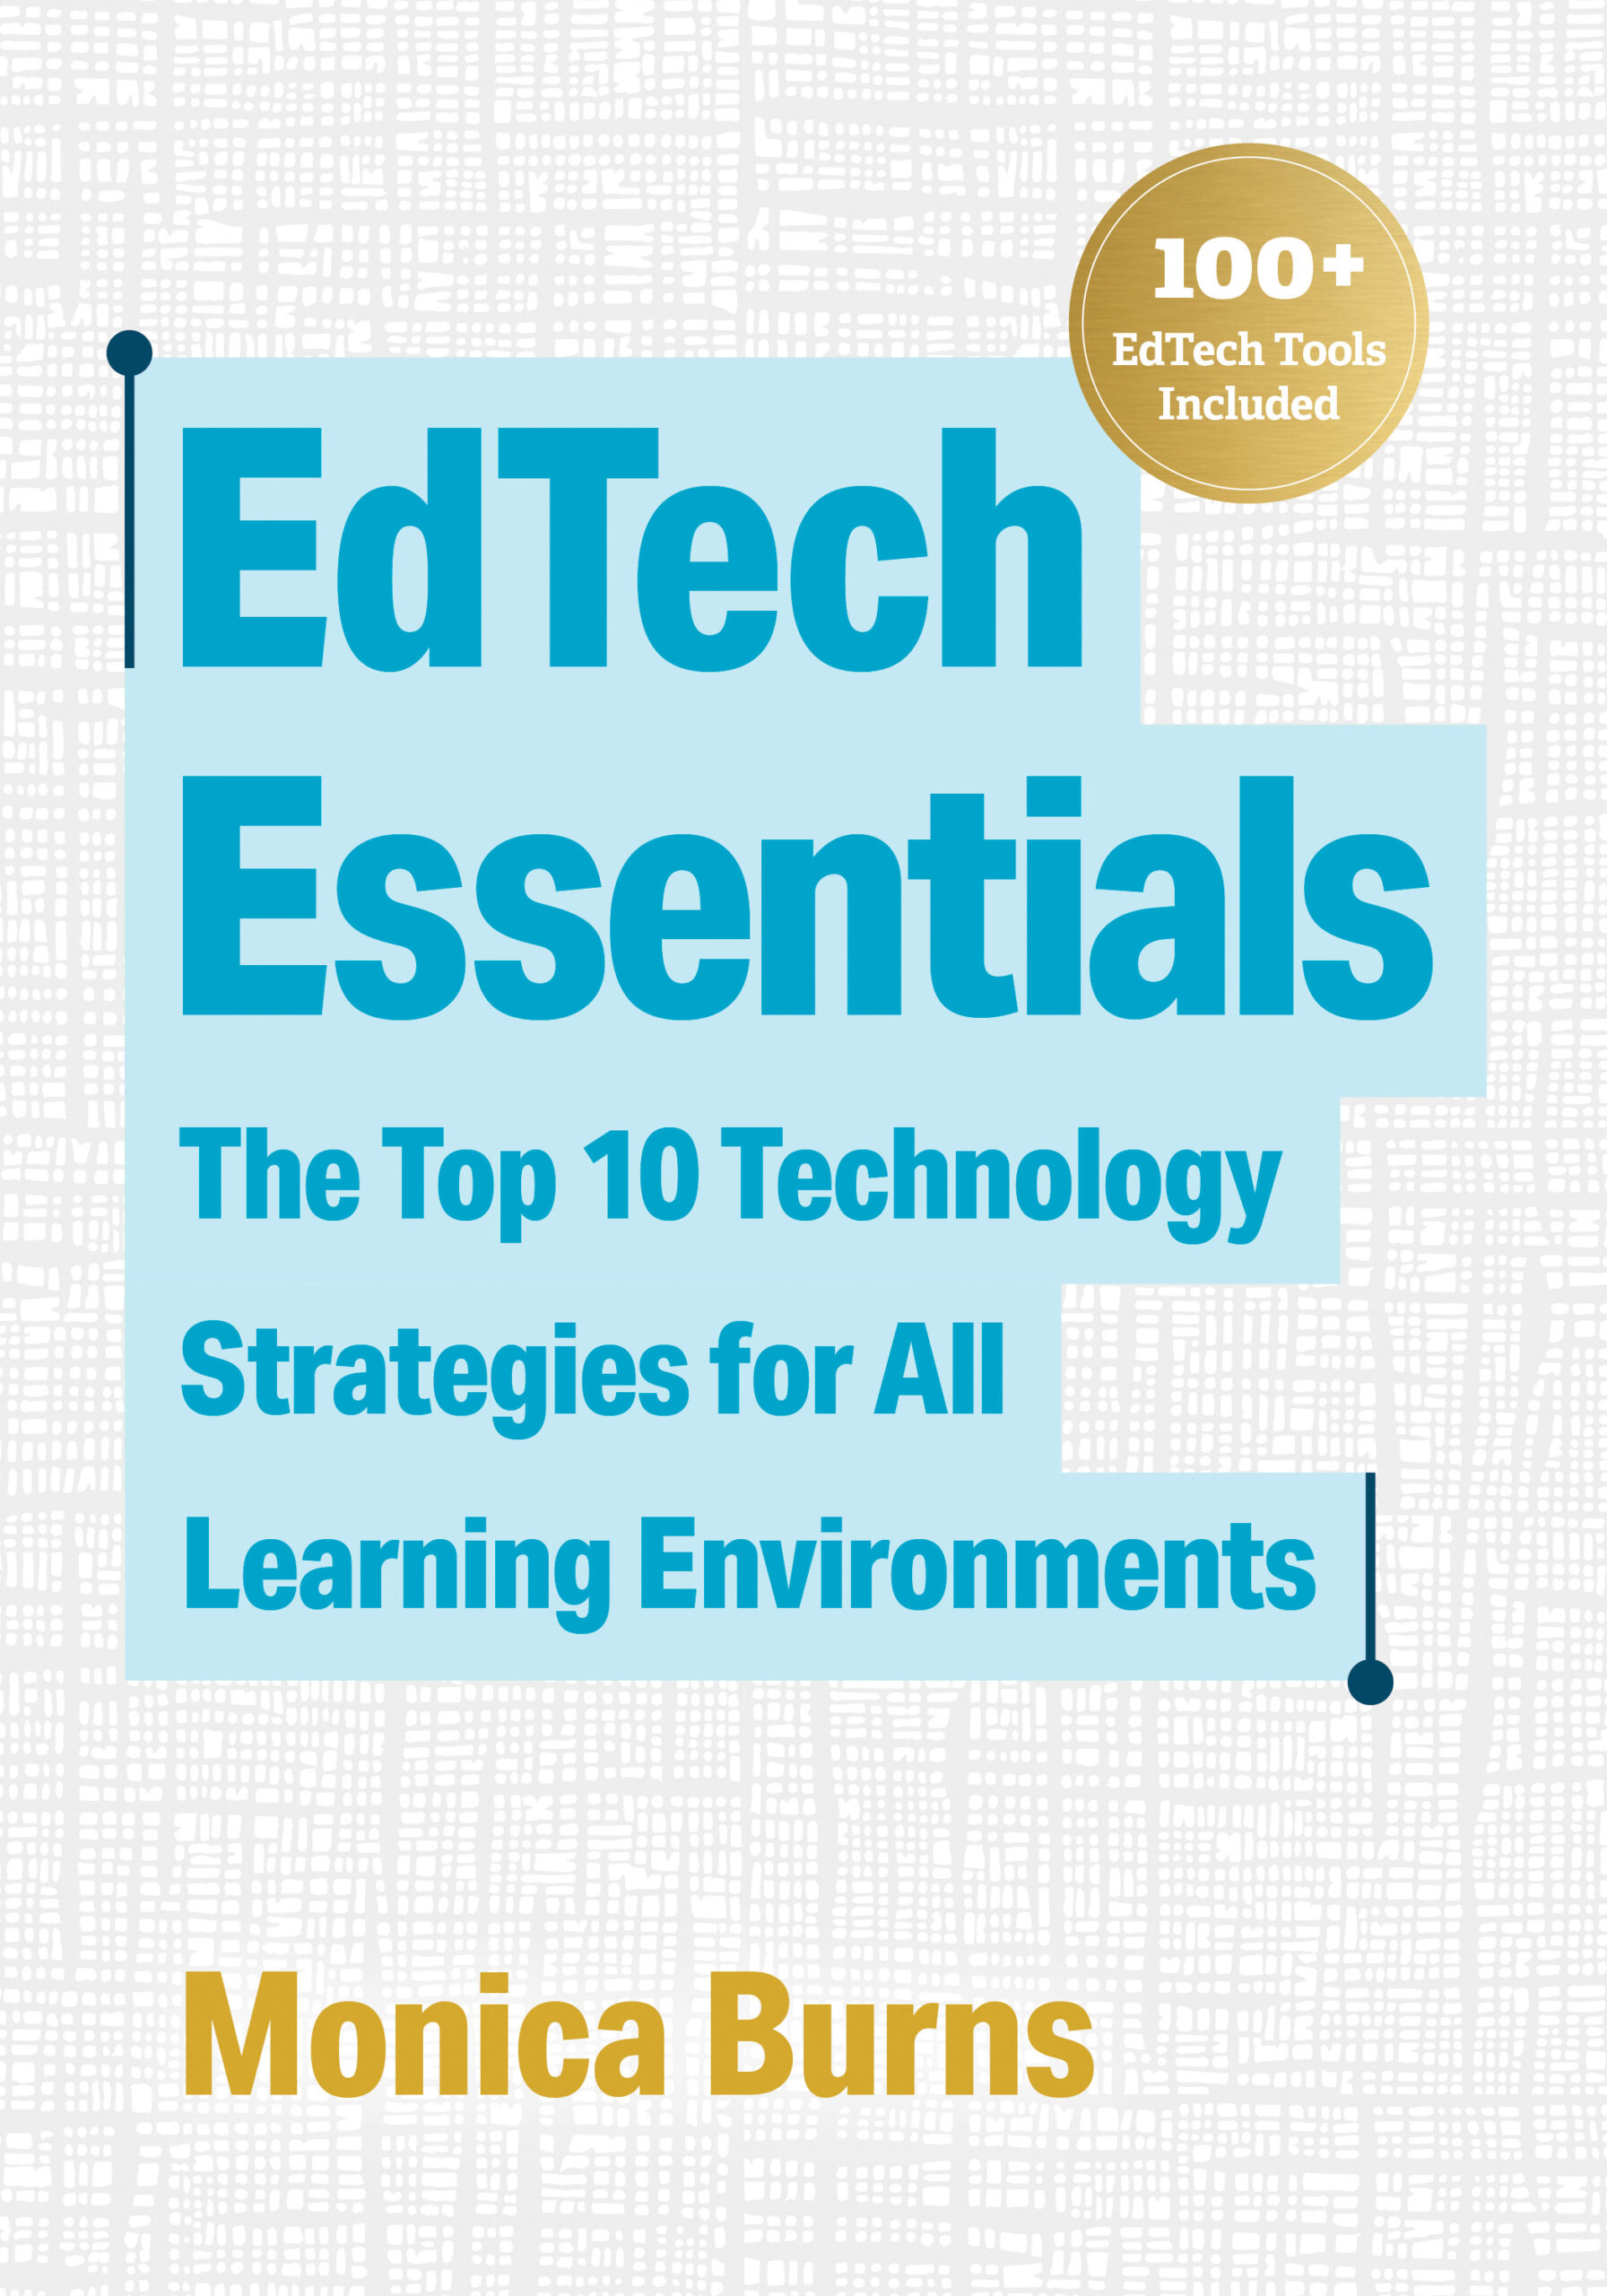 Book Cover: EdTech Essentials - The Top 10 Technology Strategies for All Learning Environments, by Monica Burns